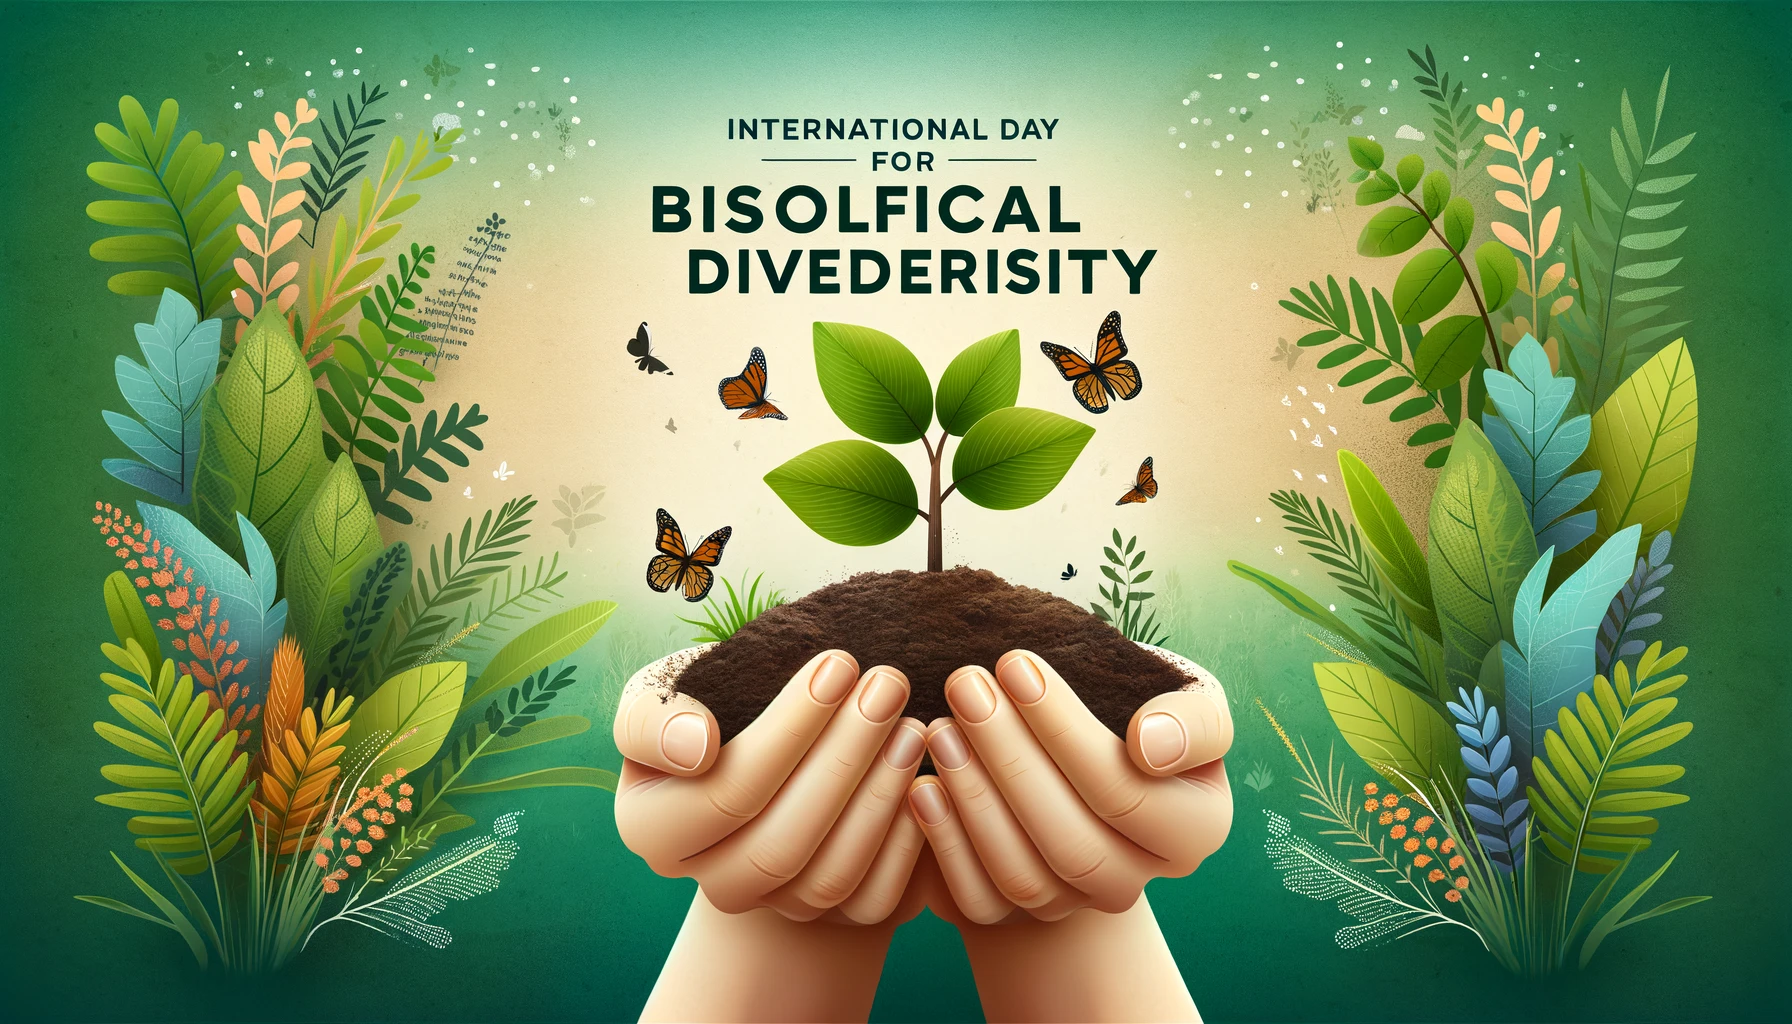 Inspiring Quotes for International Day for Biological Diversity